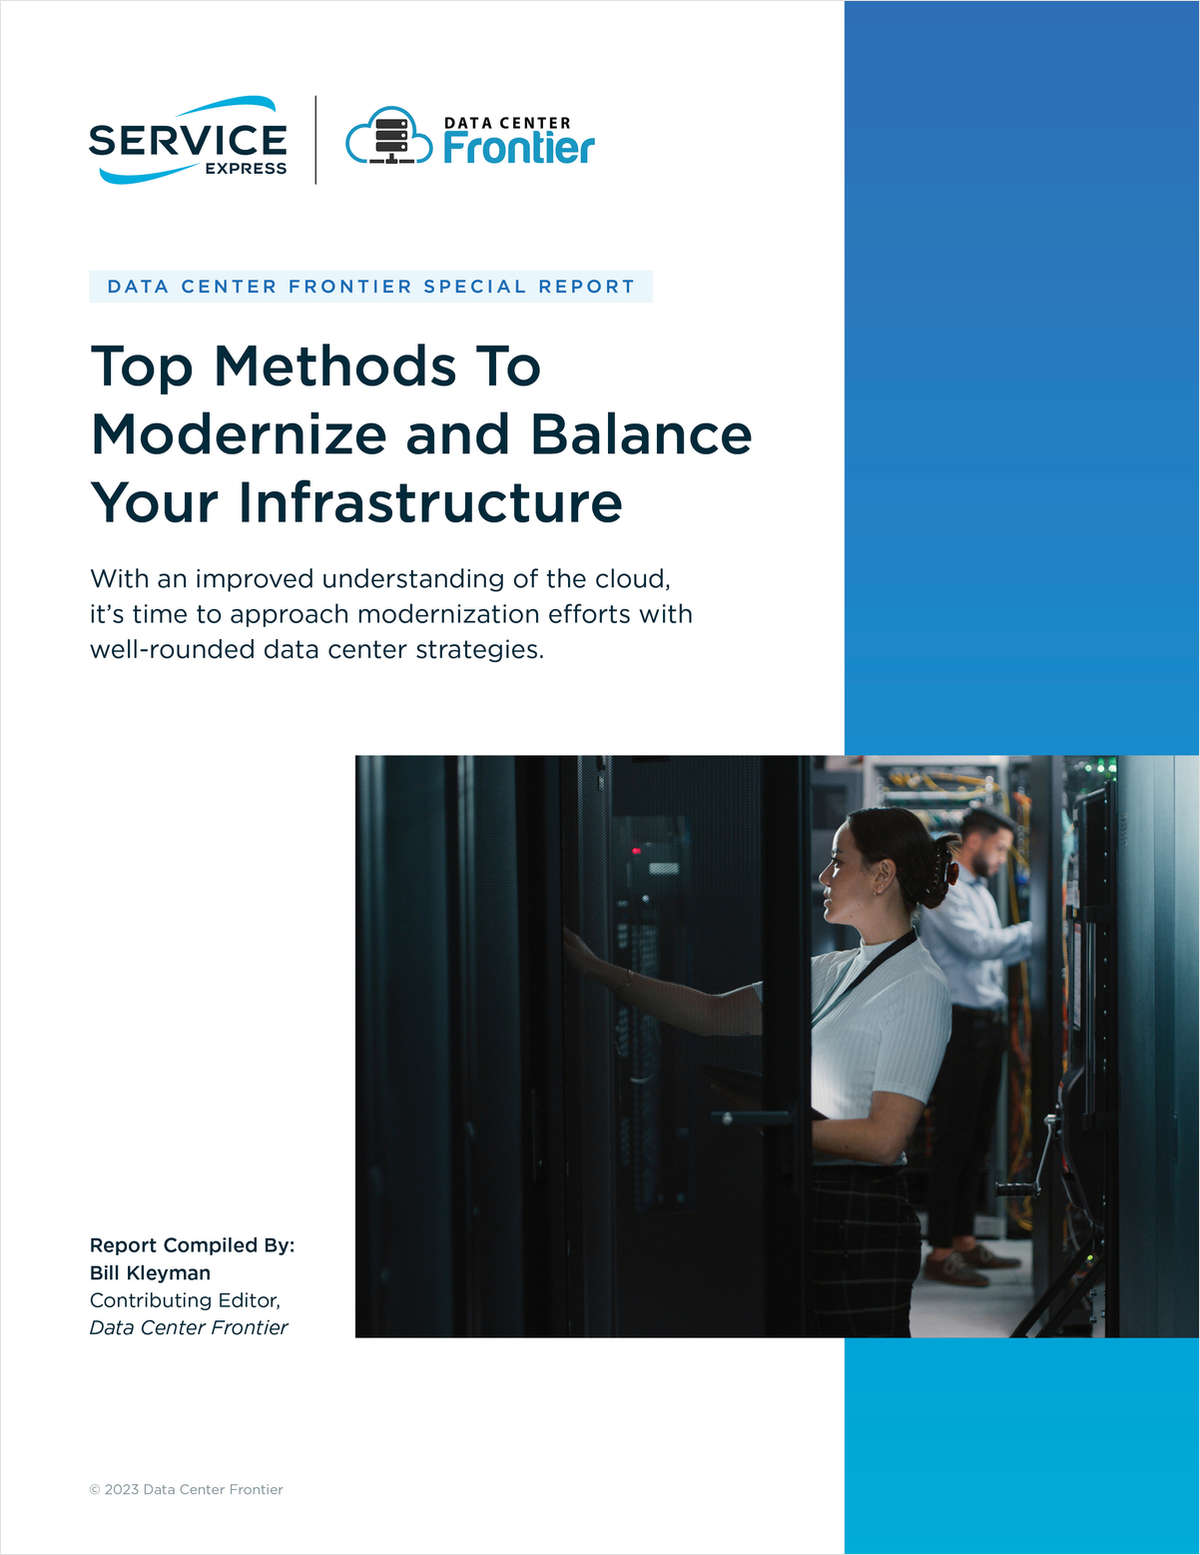 Special Report: Top Methods To Modernize and Balance Your Infrastructure